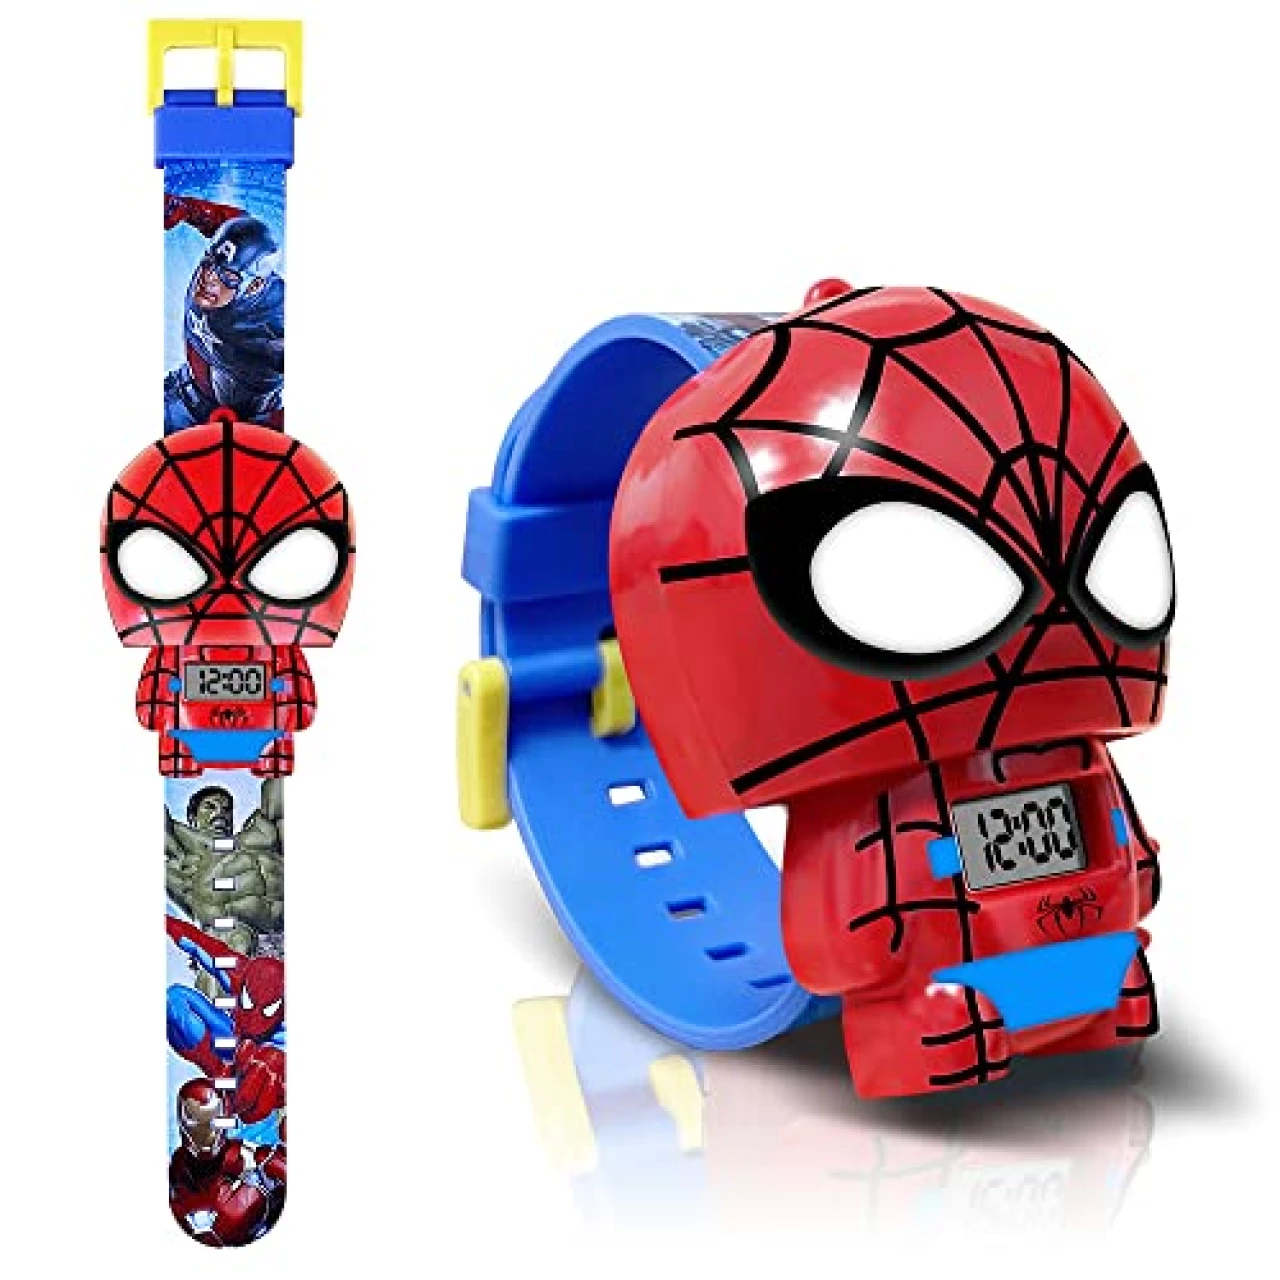 econoLED Kids Watch, Superhero Outdoor Sport Watches for Boys Girls, Adjustable Strap, Gift for Kids